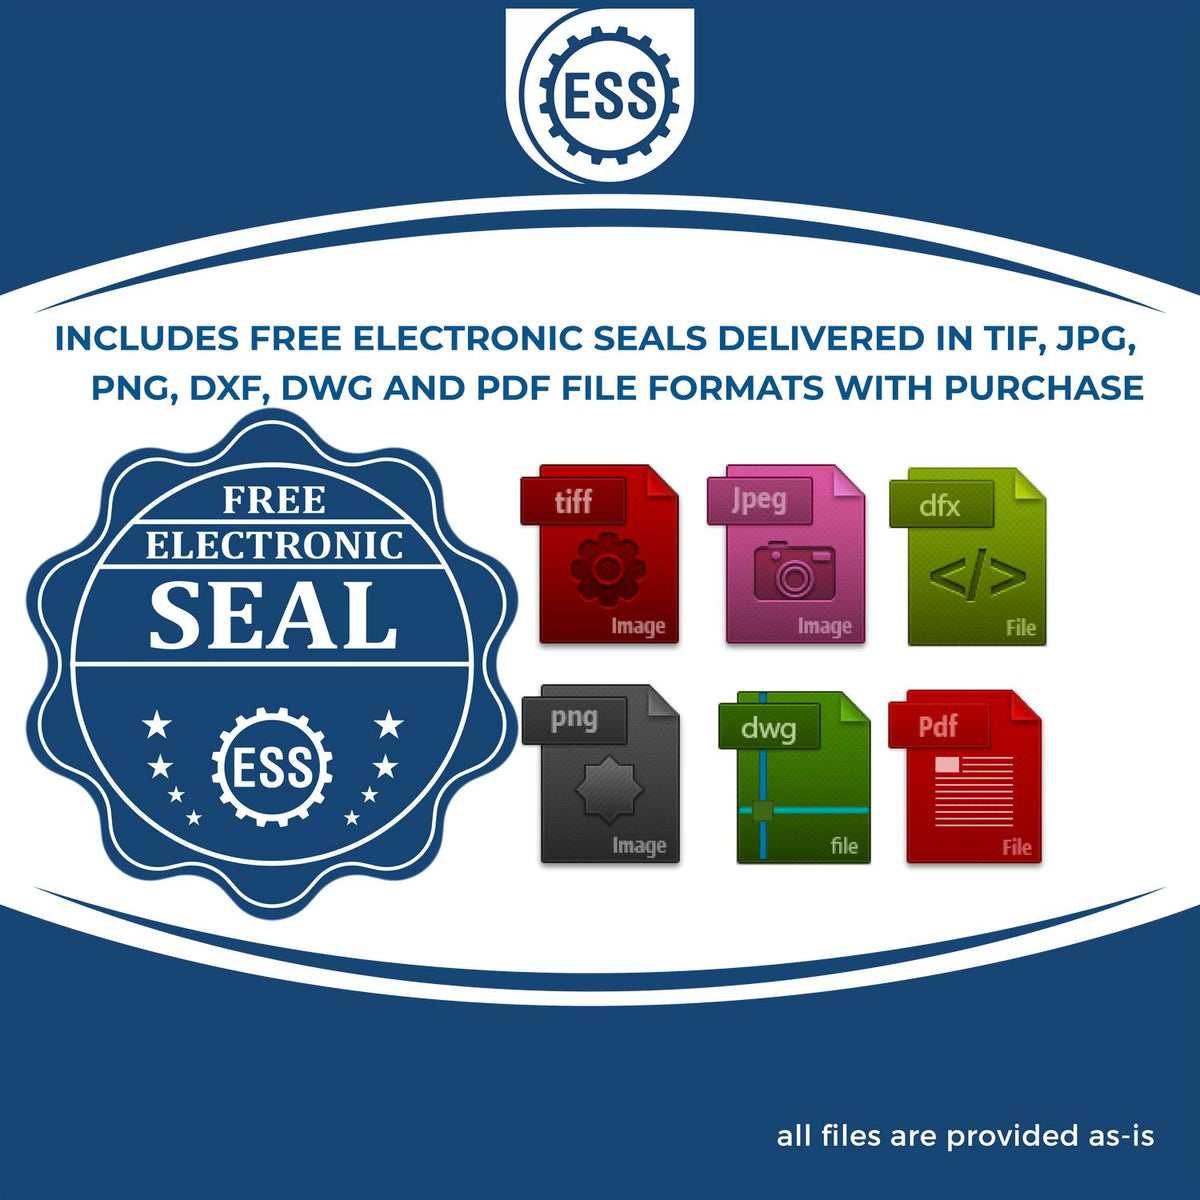 An infographic for the free electronic seal for the State of Delaware Extended Long Reach Geologist Seal illustrating the different file type icons such as DXF, DWG, TIF, JPG and PNG.